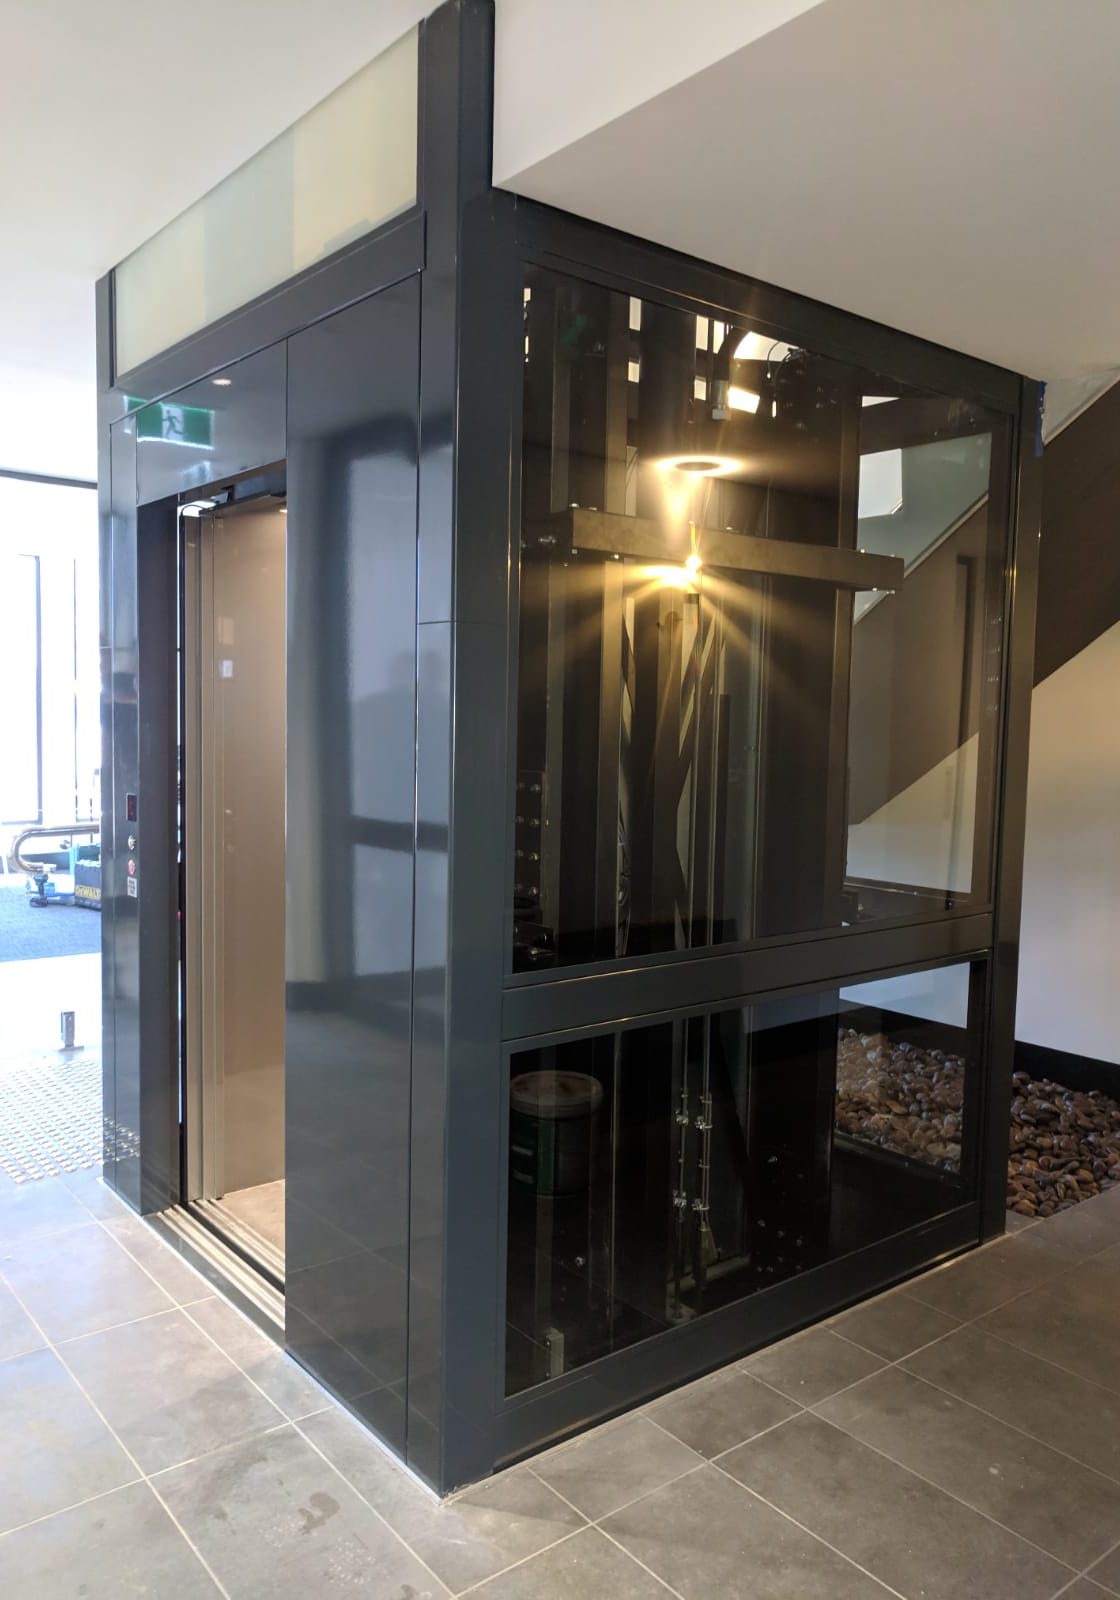 A commercial lift that is DDA compliant in Katanning